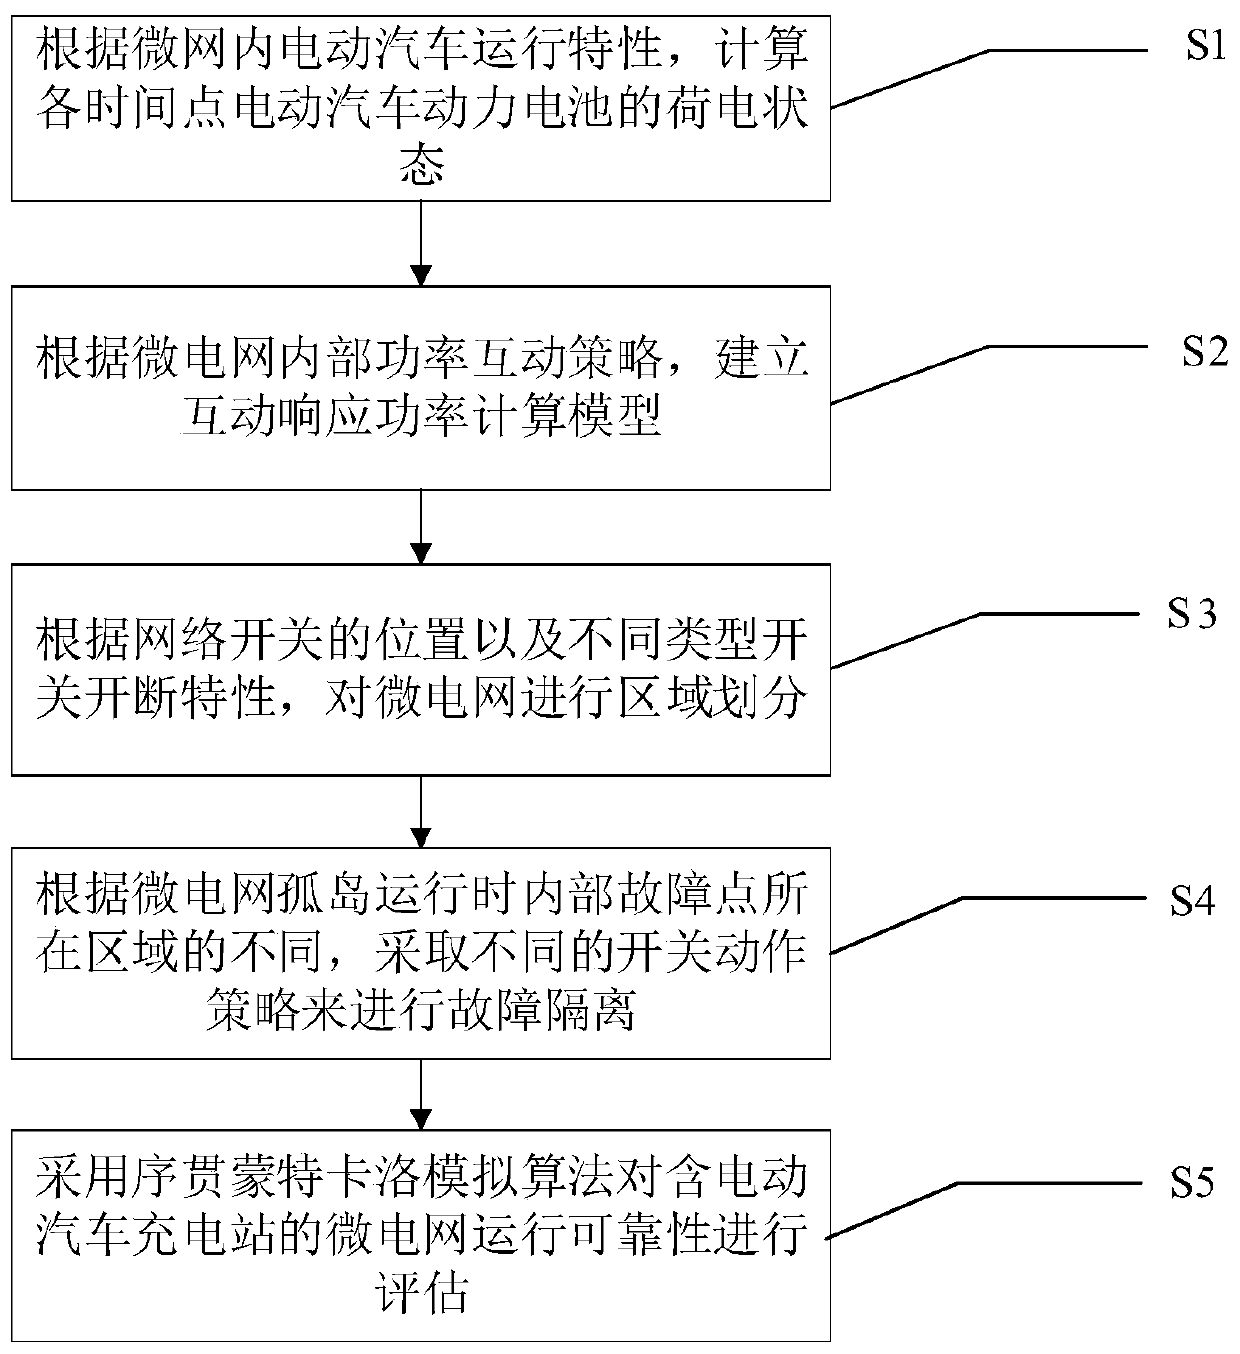 Micro-grid reliability evaluation method containing electric vehicle charging station